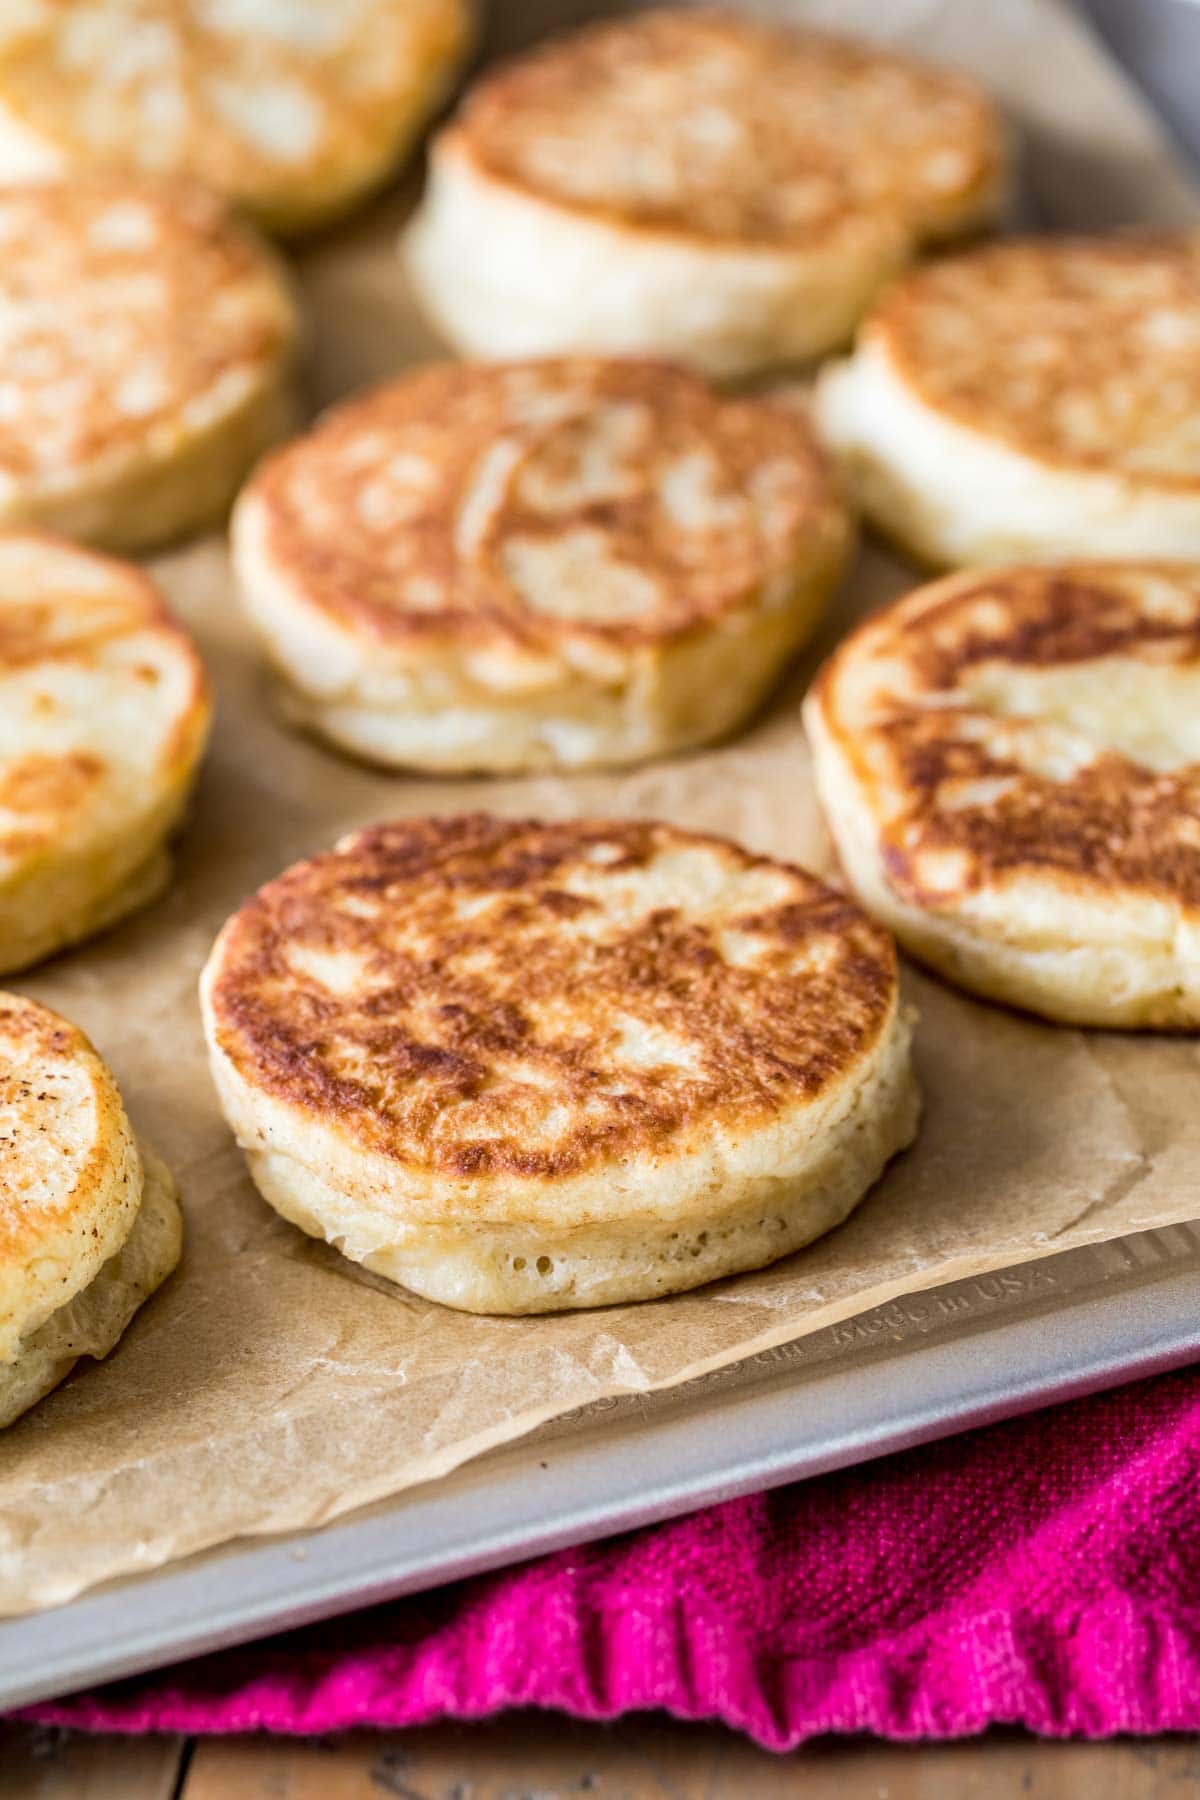 Golden brown English muffins on a parchment lined baking sheet.